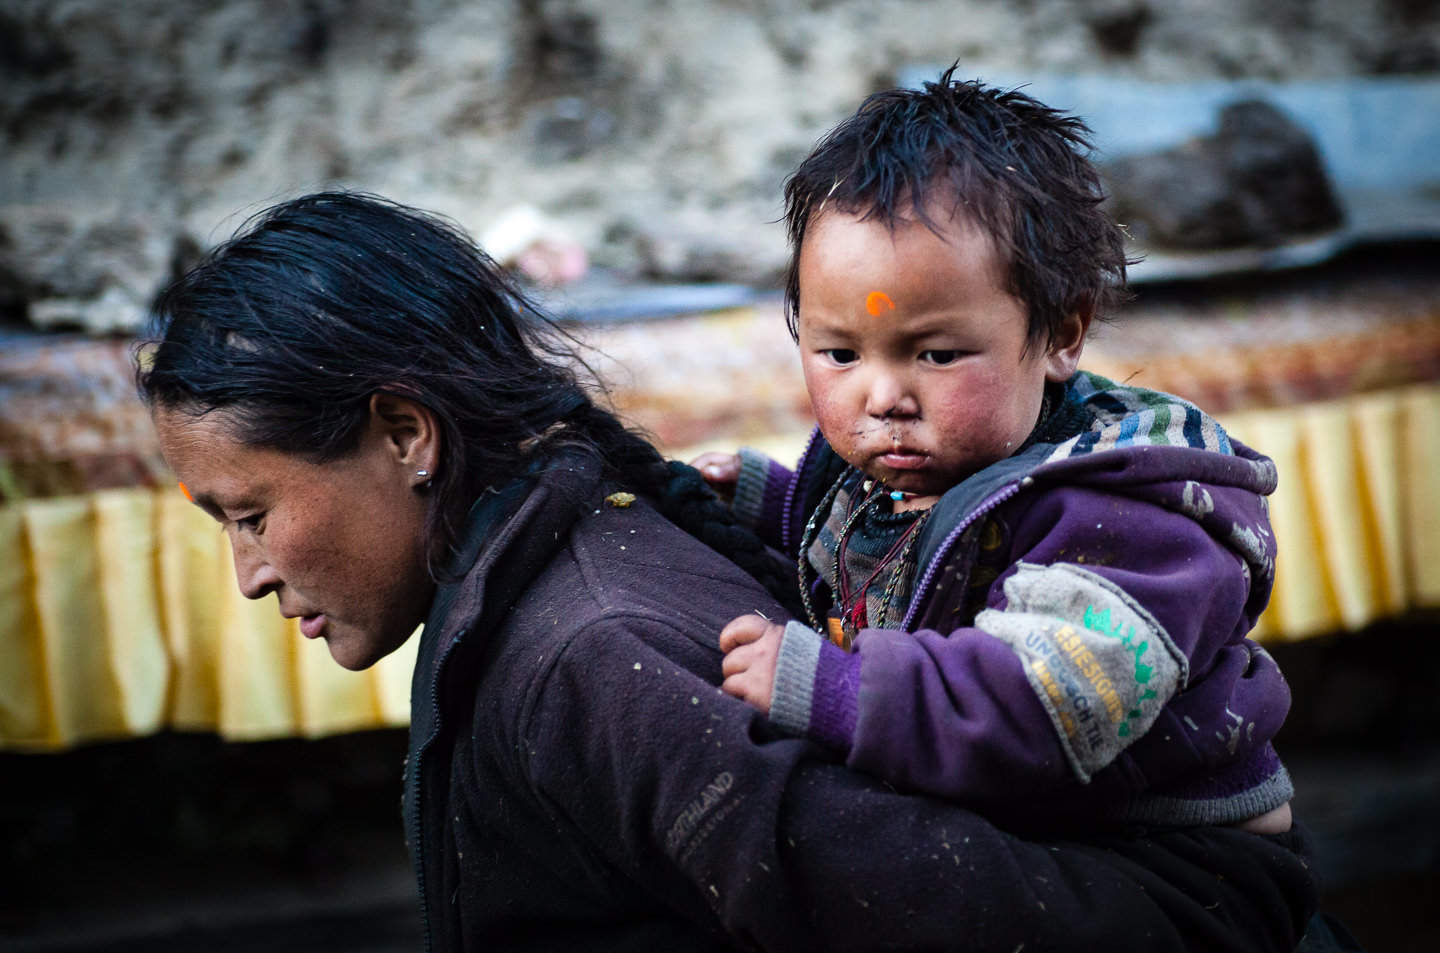 A mother and son on their way home after a Puja ceremony in the region of Manaslu Nepal.